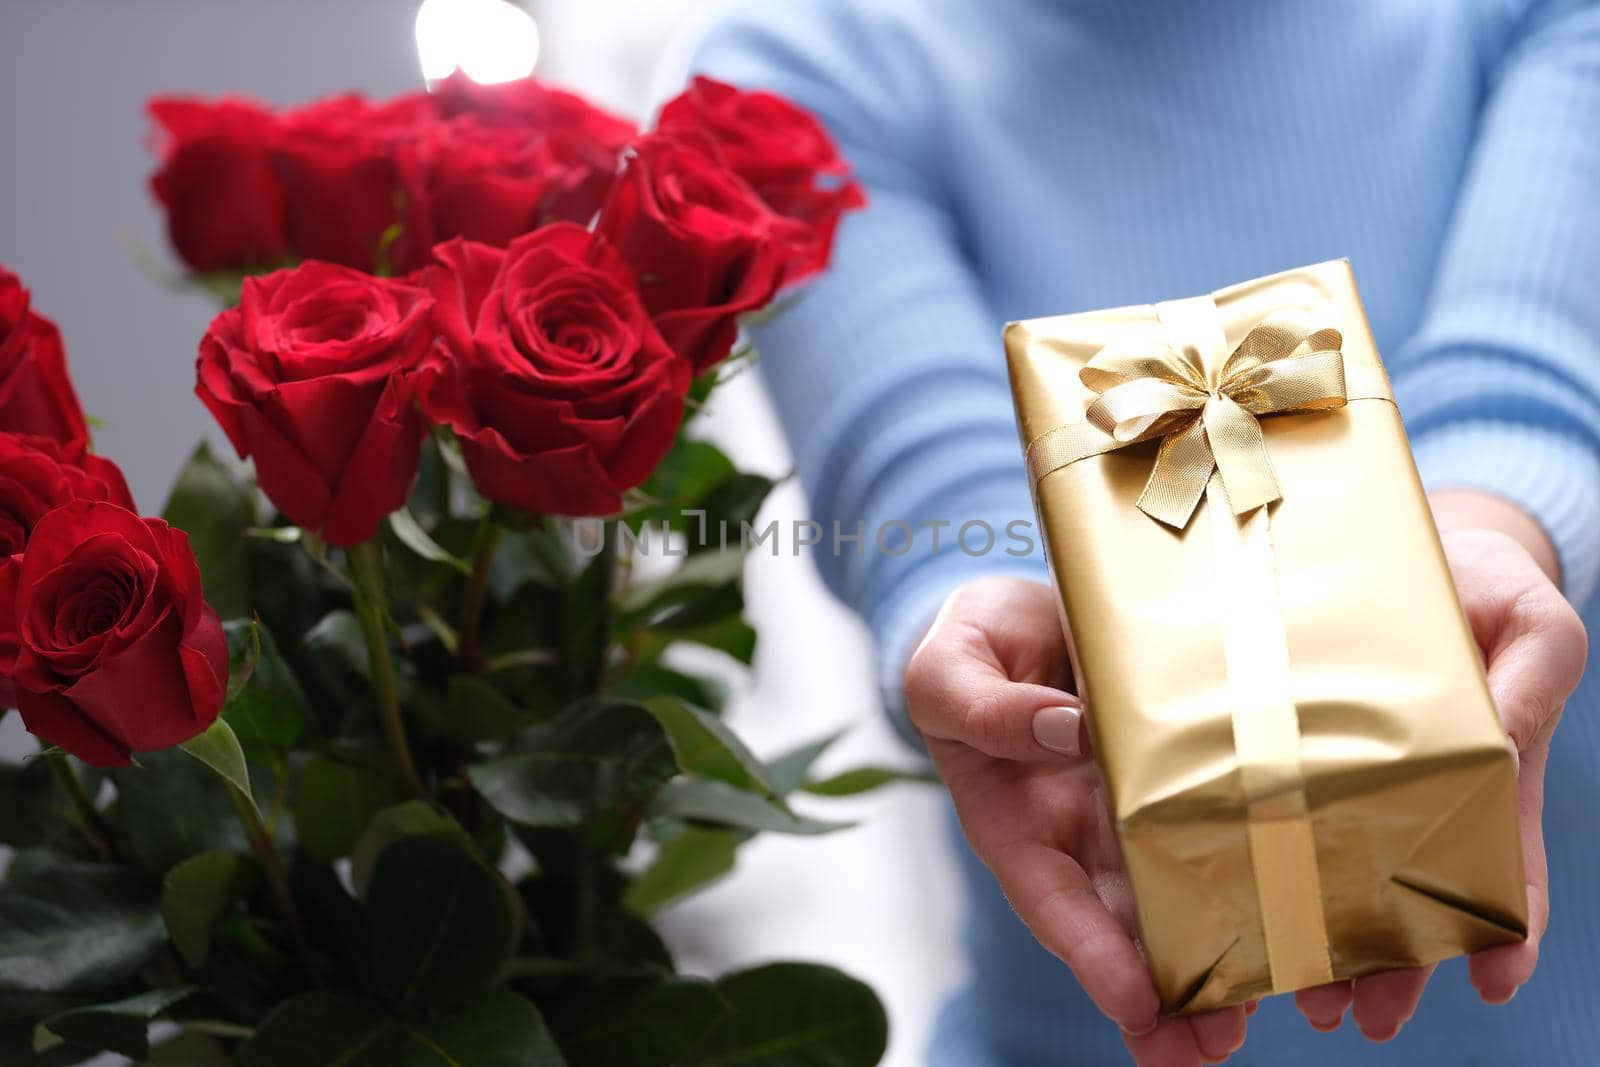 Bouquet of red roses and golden gift box in hands of courier. Delivery of romantic gifts concept